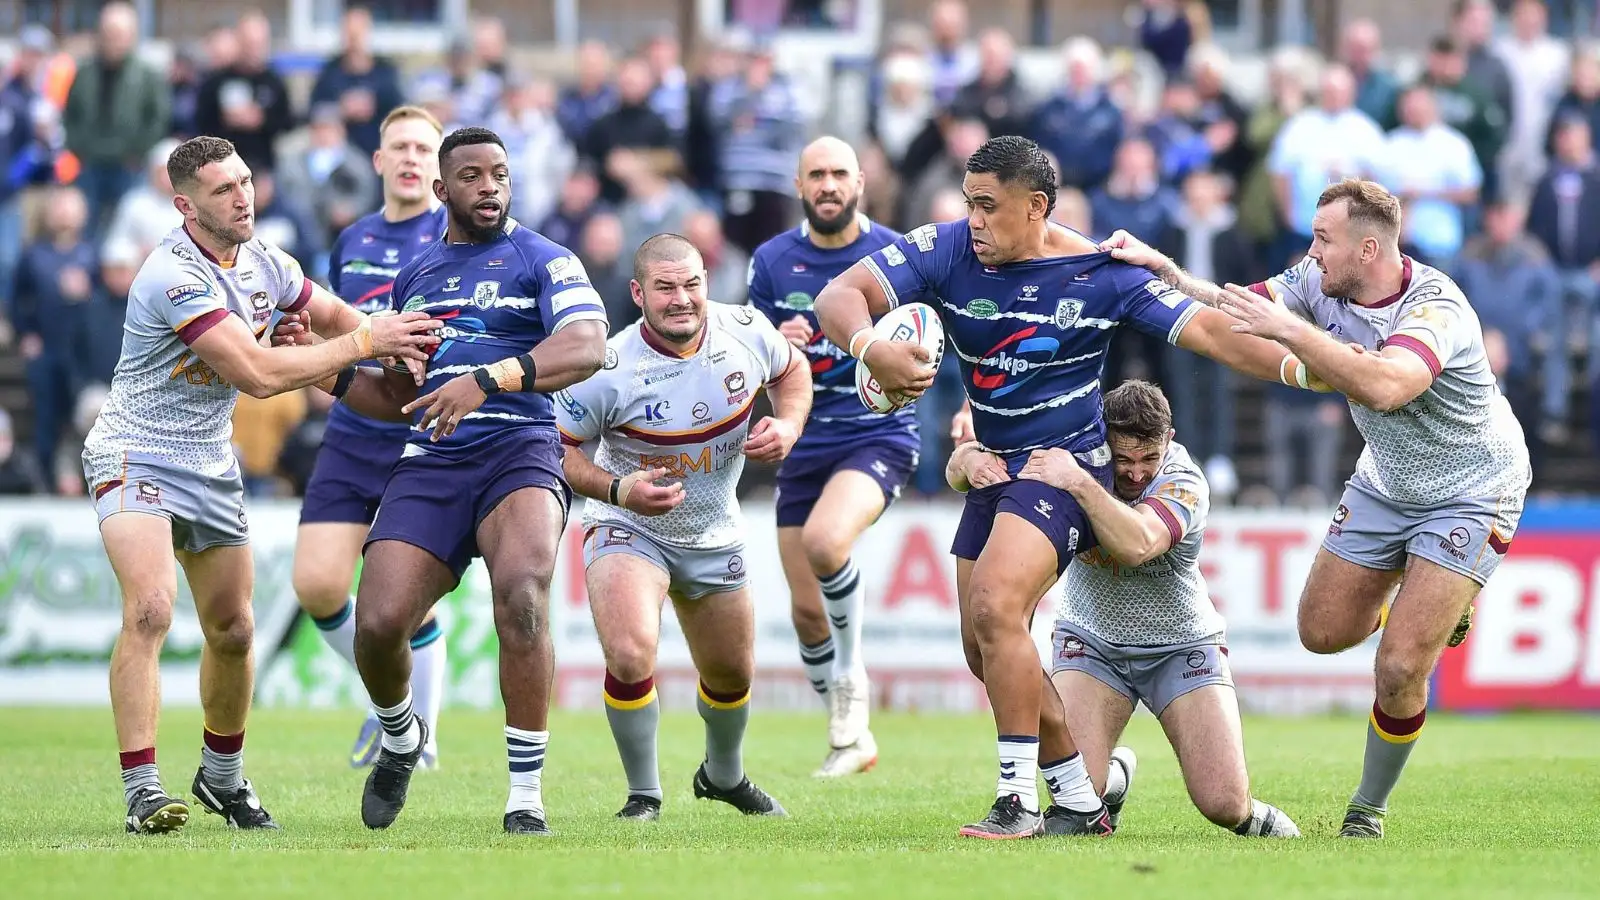 Former Castleford Tigers, Featherstone Rovers powerhouse retires after 17-year professional career: ‘The time has come’